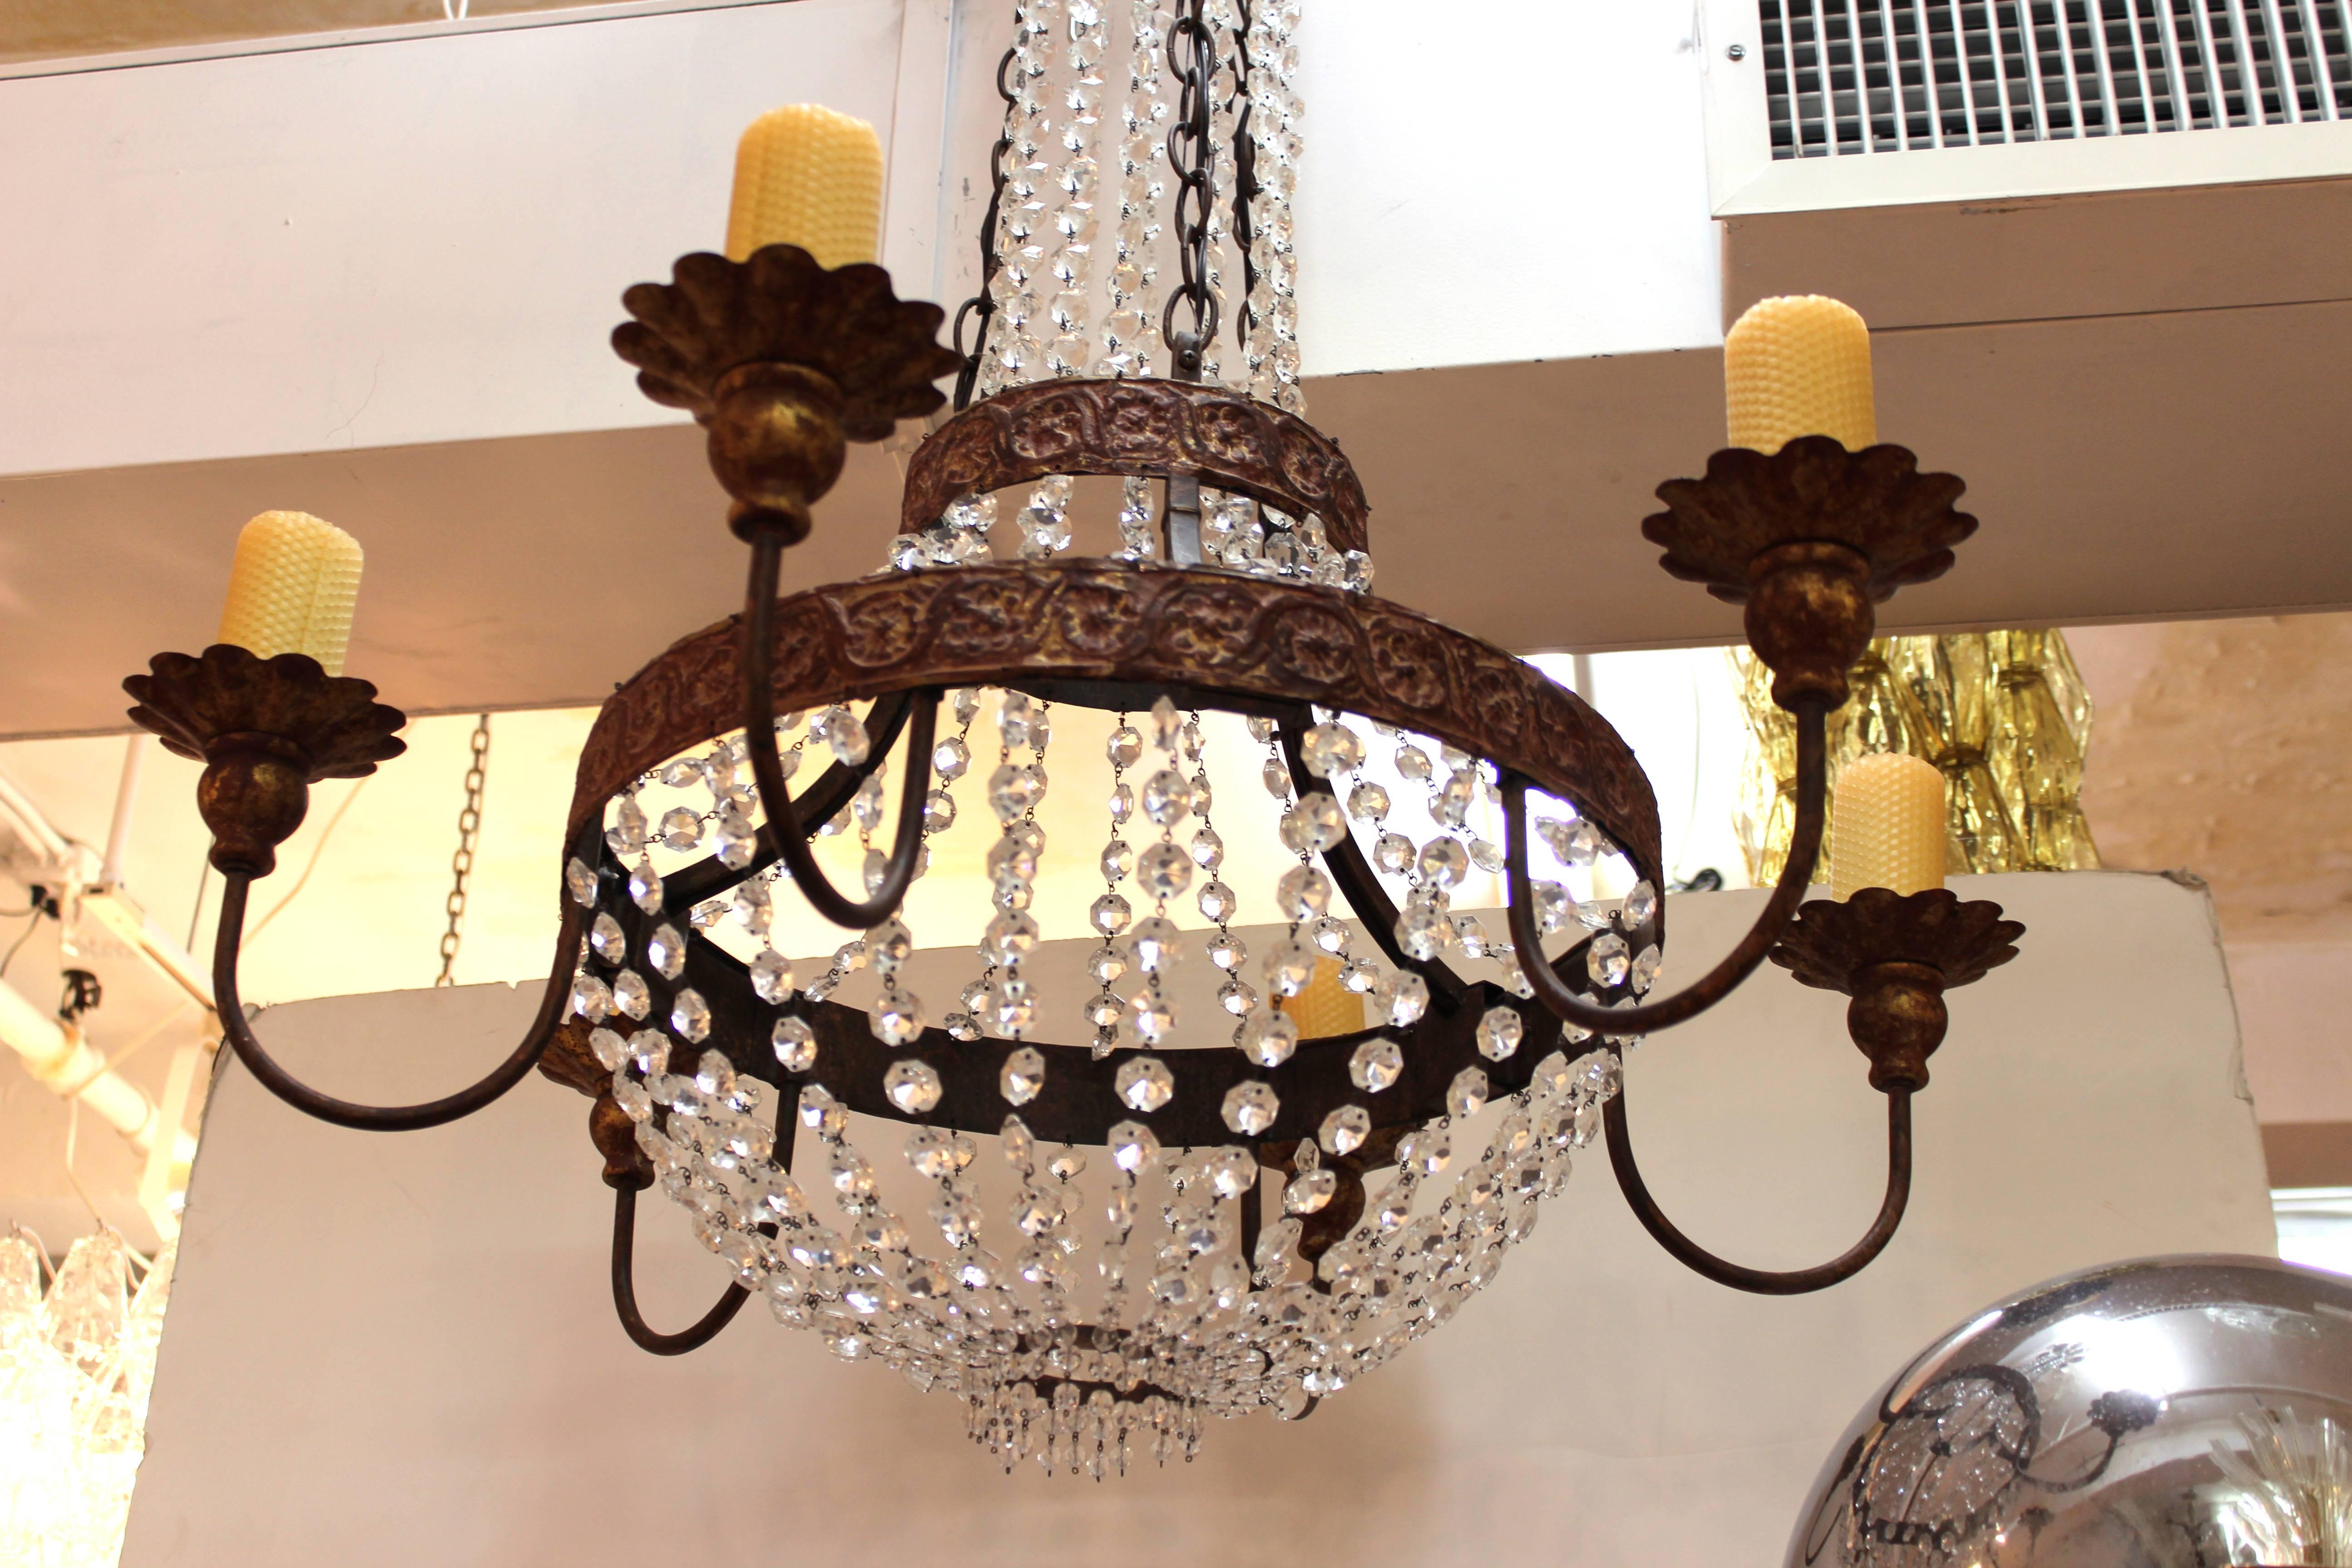 Chandelier in the French 19th Century style. Strings of cut crystal beads cascade from a acanthus leaf crown. Six curved arms with floral details hold large beeswax 